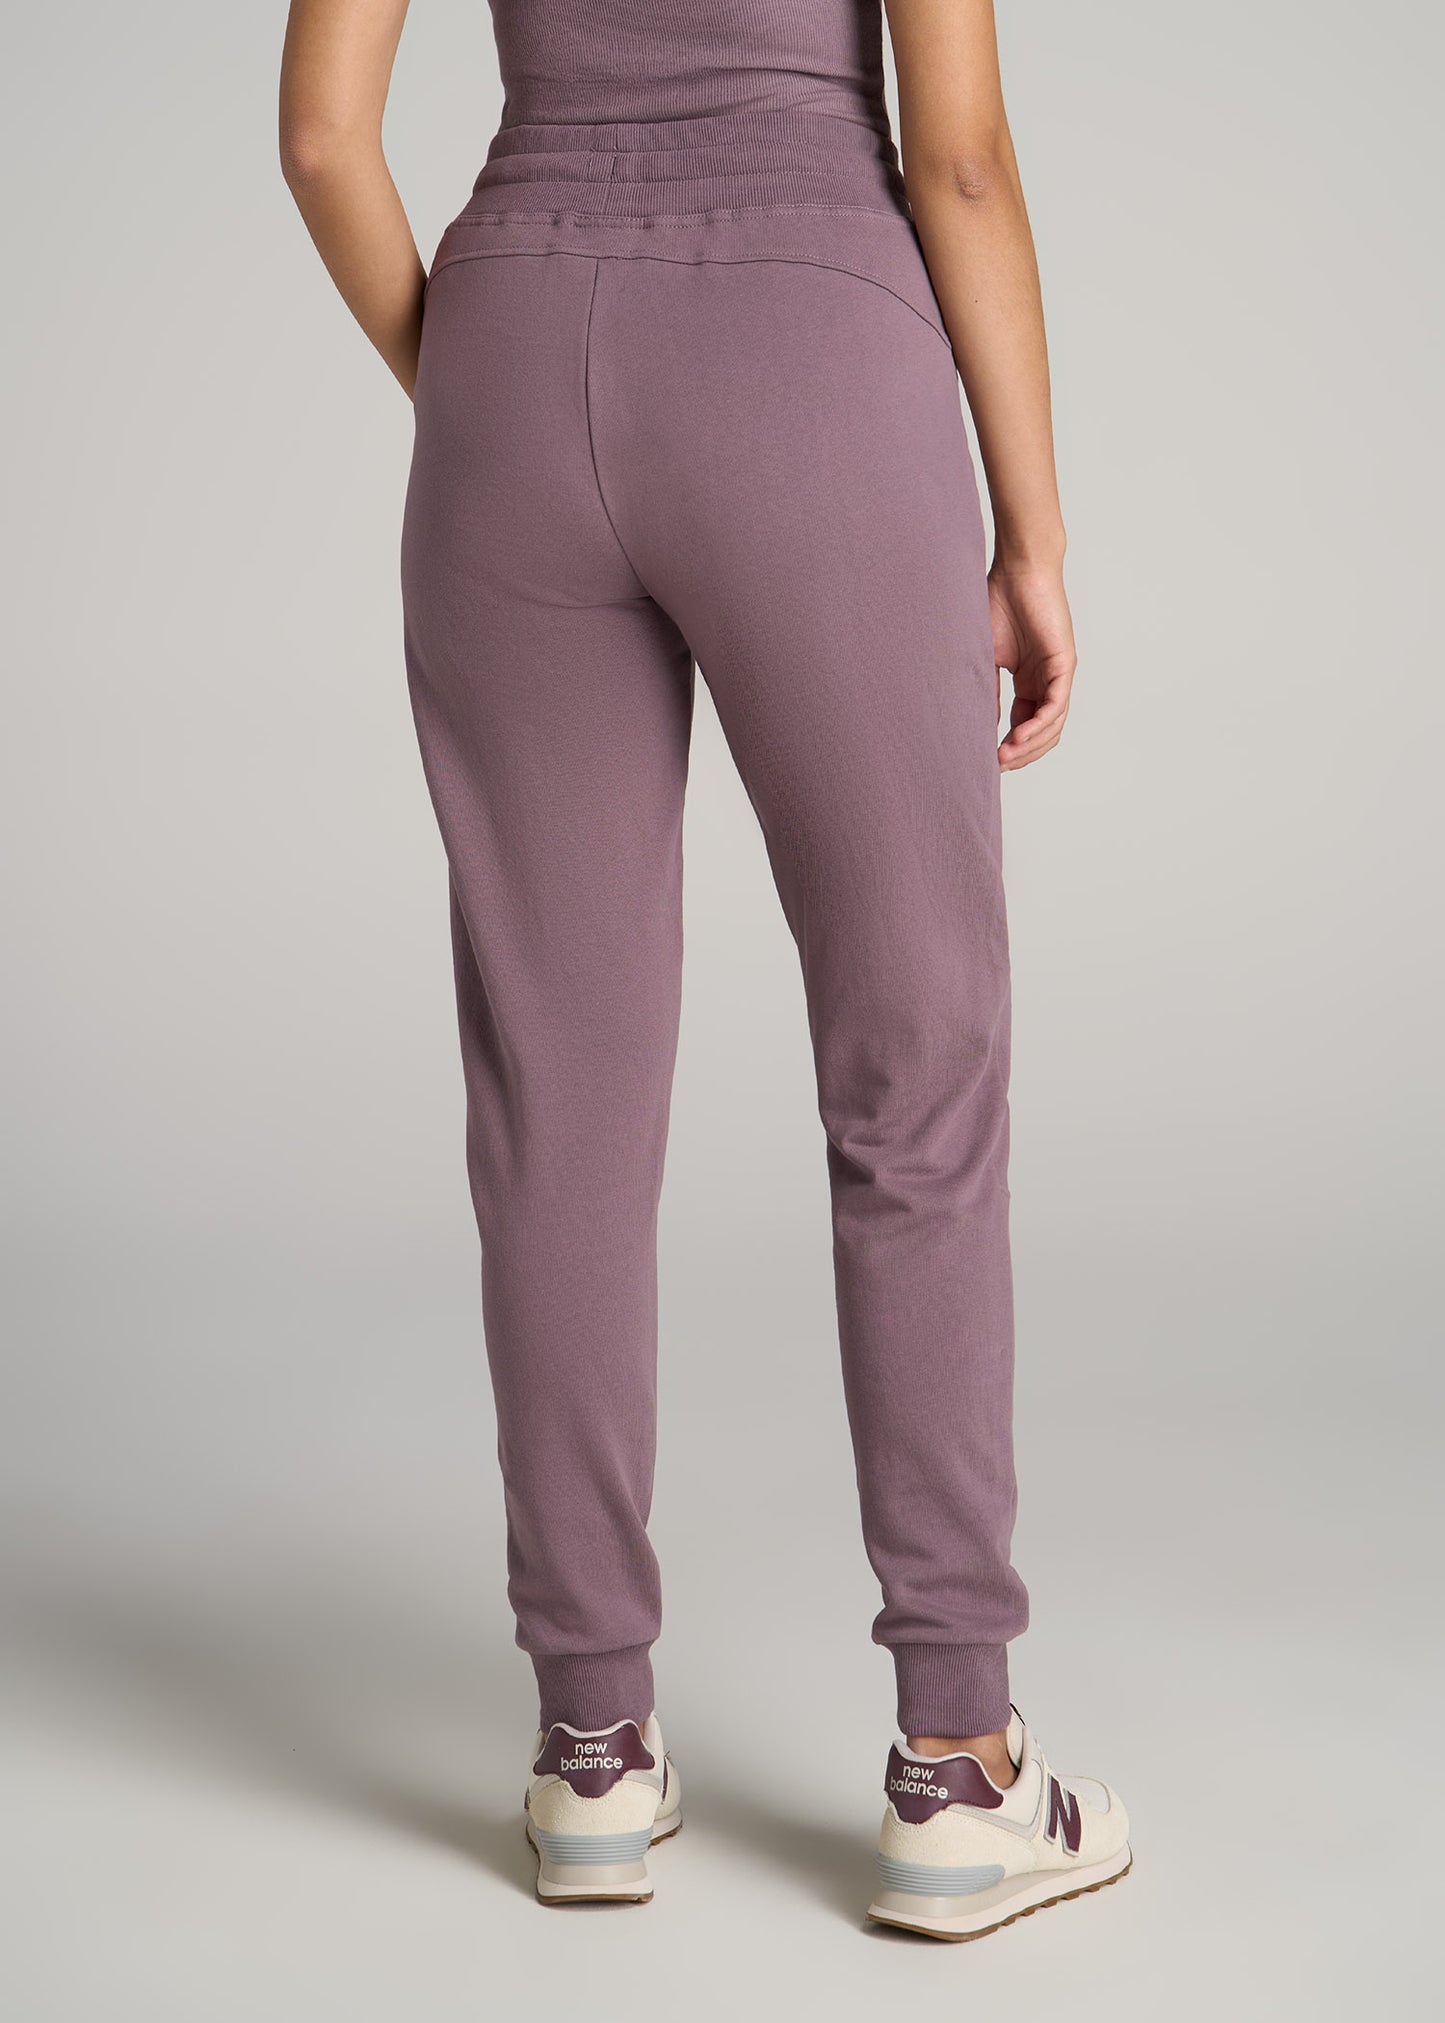 Women's Plus Size Mid-Rise French Terry Joggers - All in Motion